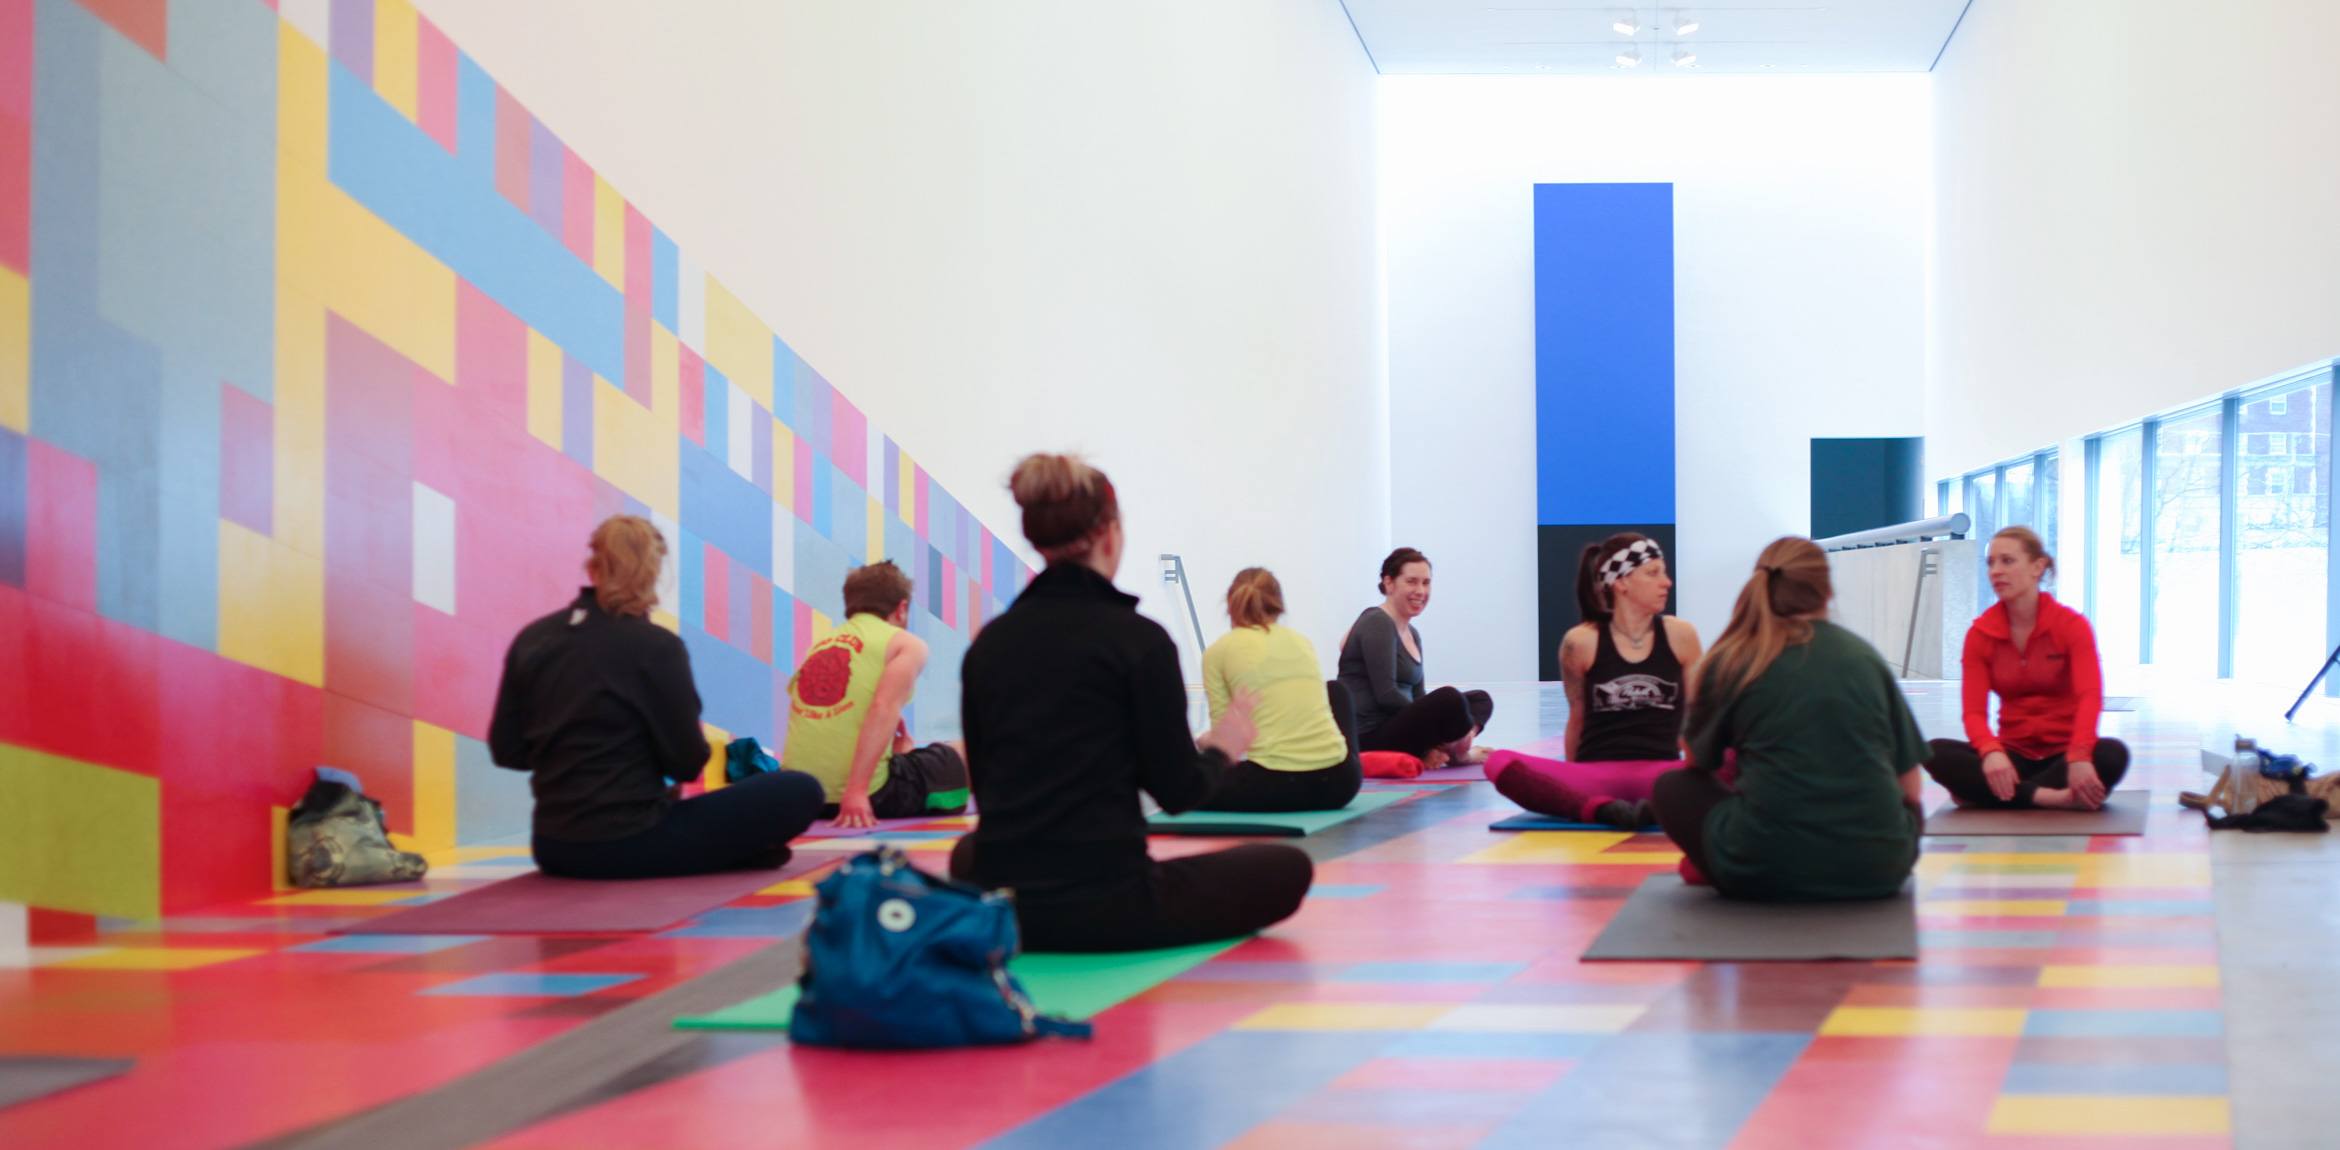 Yoga participants sit on yoga mats in the Main Gallery to talk before the event begins.